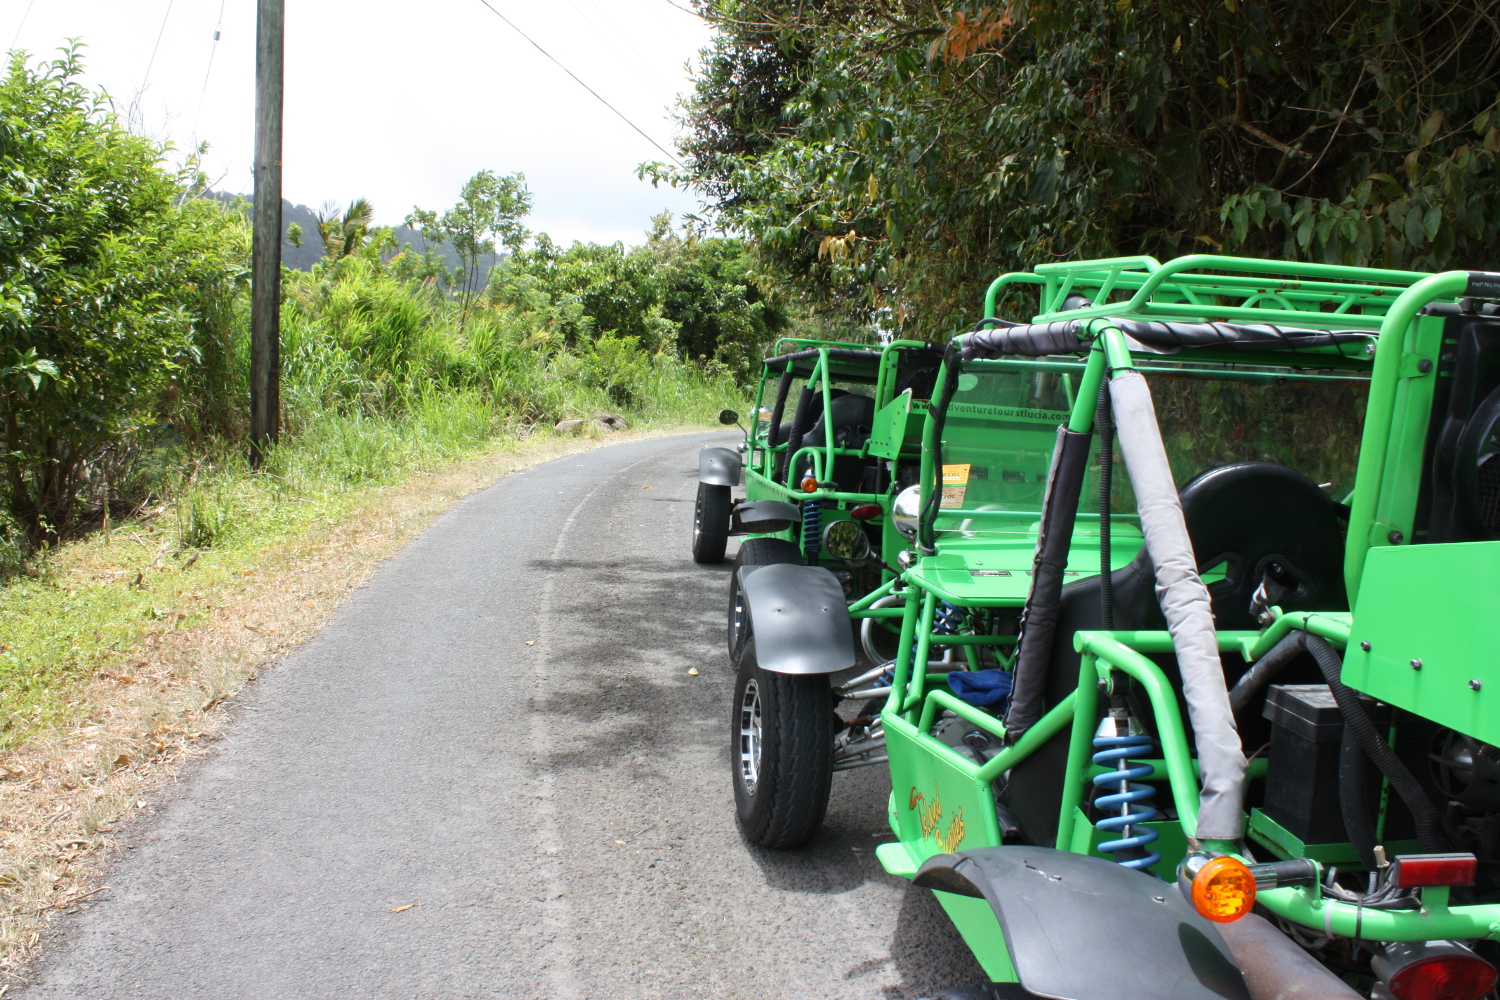 Island buggies: the best fun you can have on four wheels. Image by Lorna Parkes / Lonely Planet